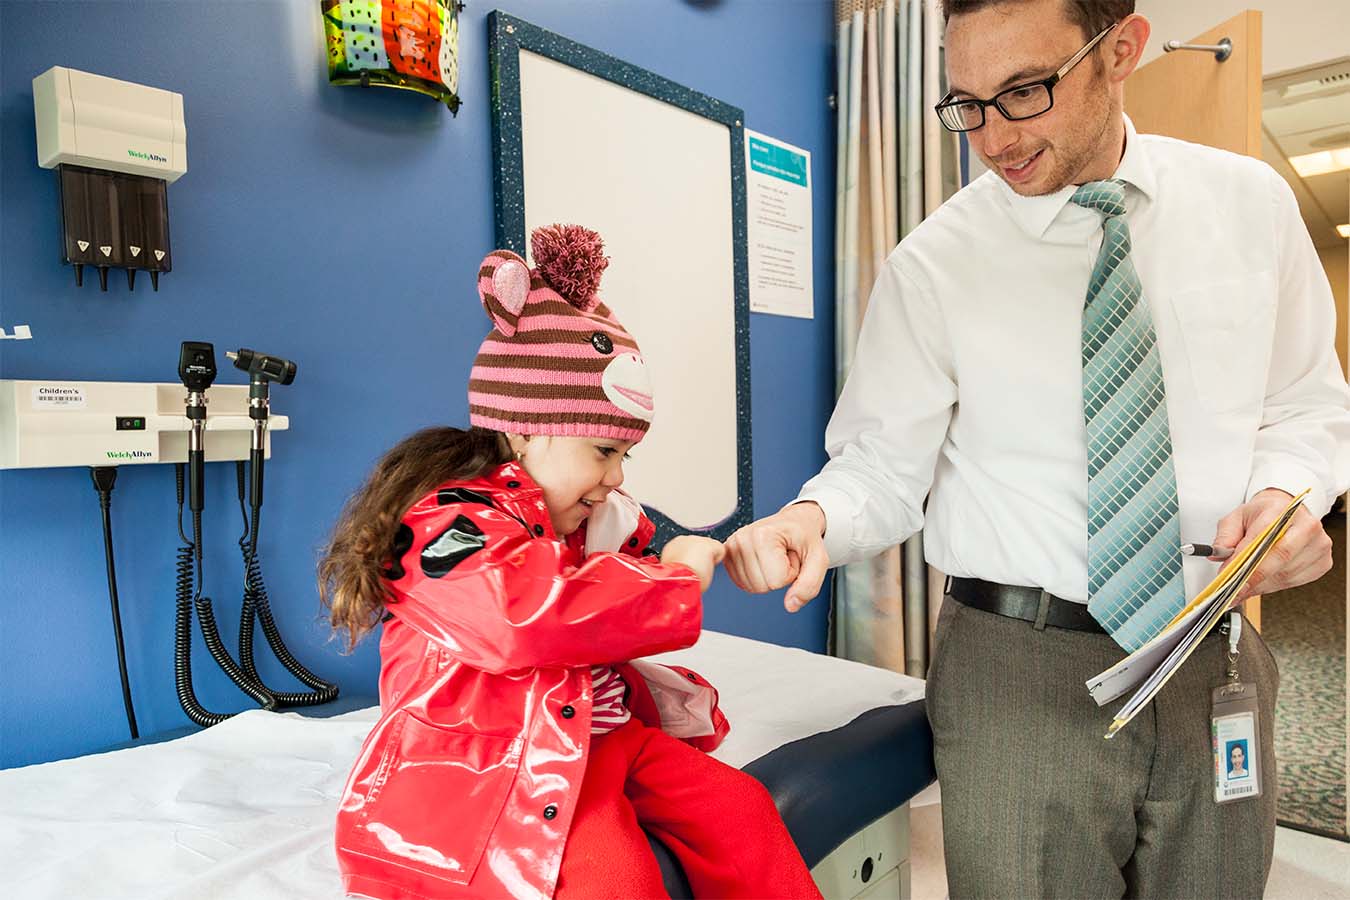 A doctor greets a child with a fist bump in an exam room.